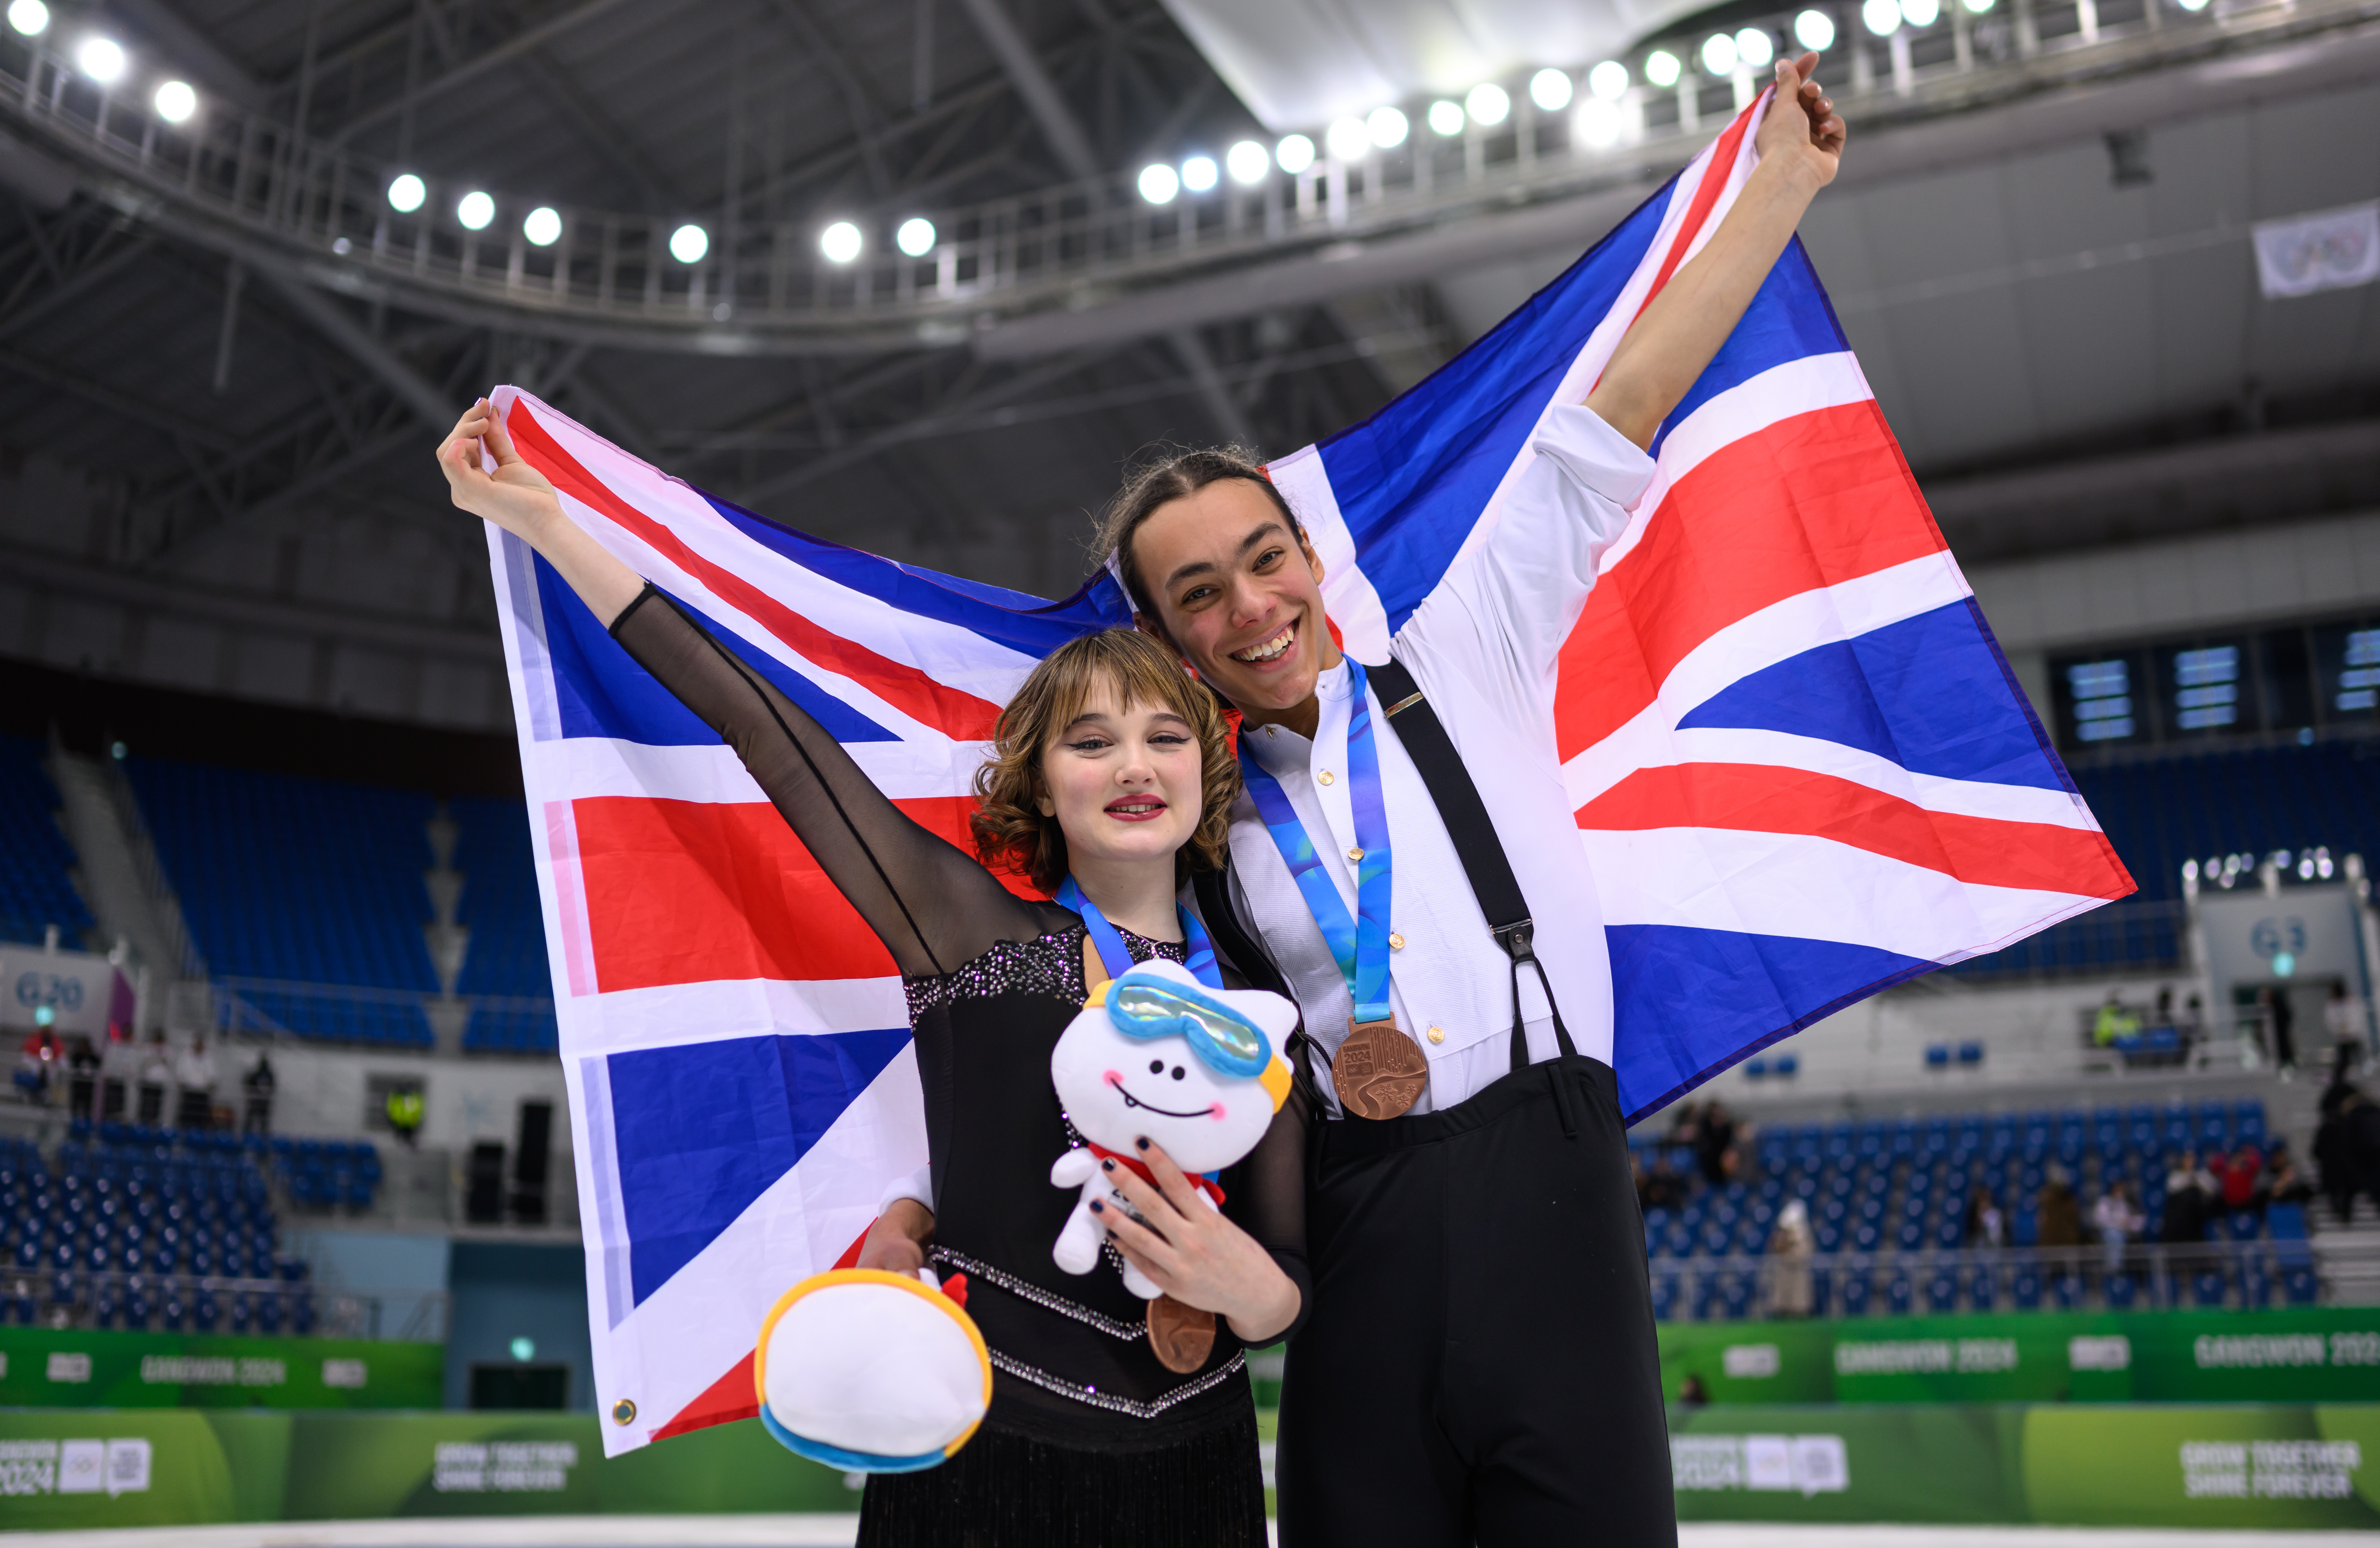 Bronze medalists Ashlie Slatter (GBR) and Atl Ongay Perez (GBR) on the ice with their national flag after the medal ceremony for the Ice Dance